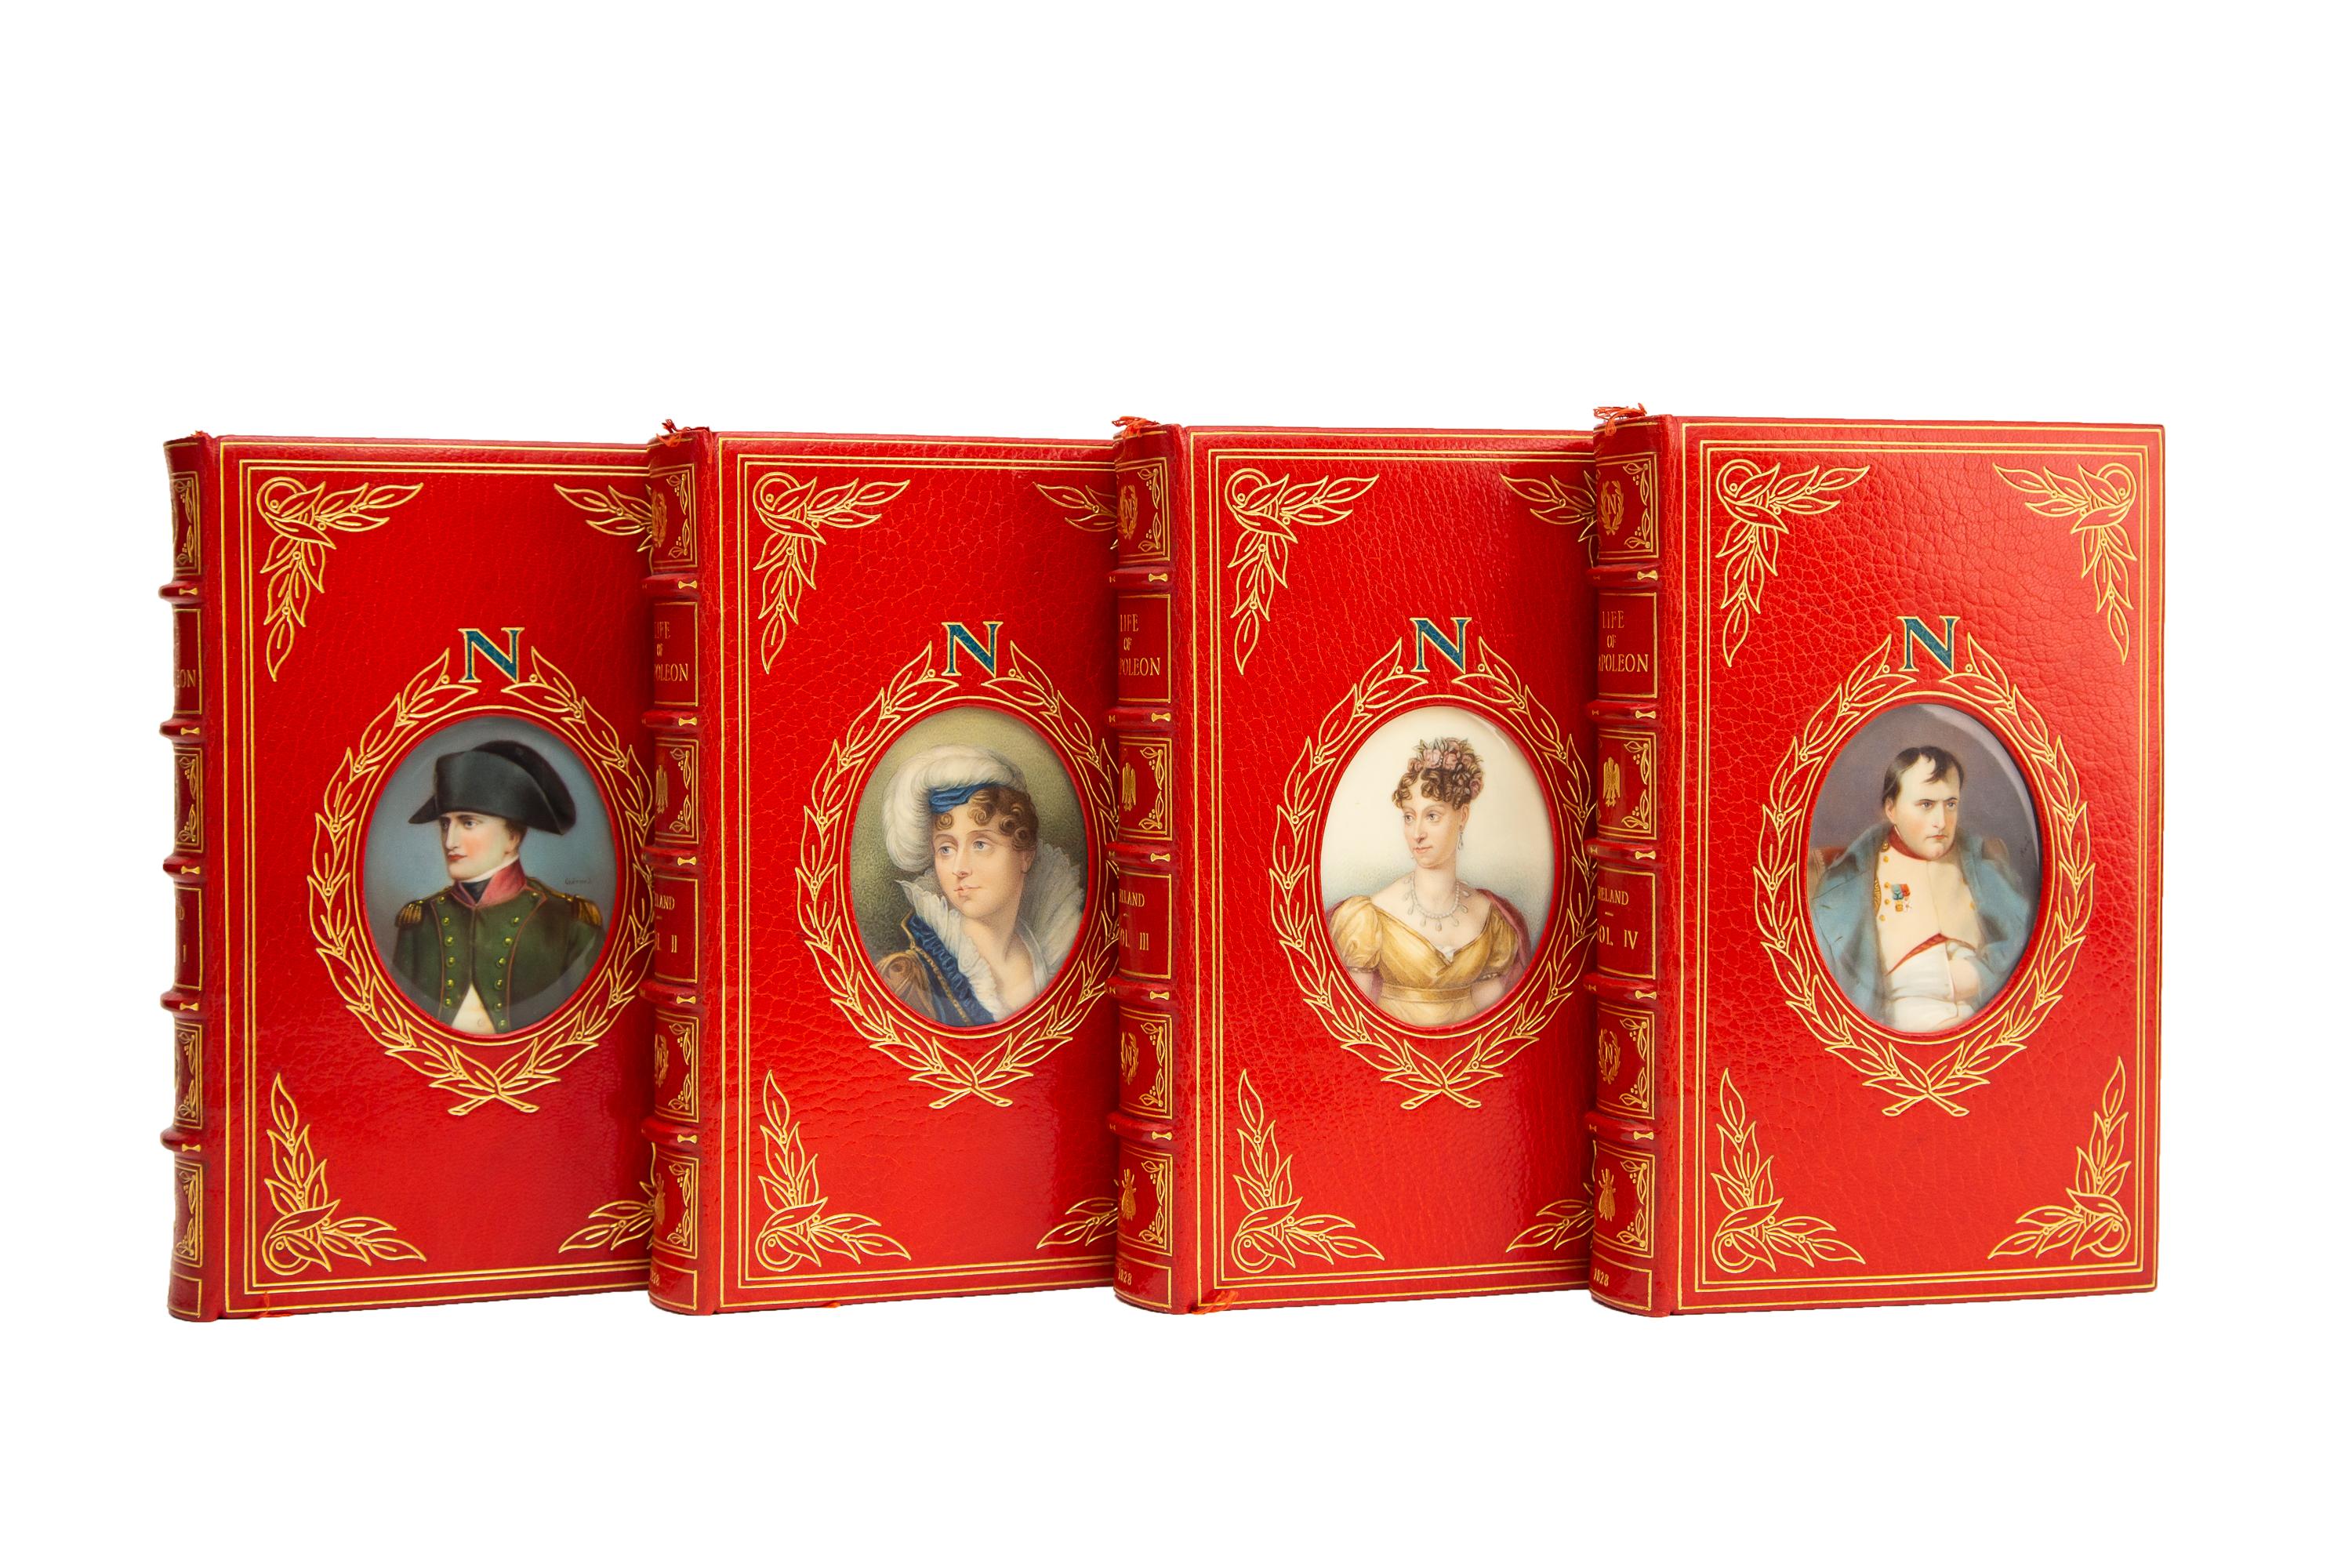 4 Volumes. W.H. Ireland, The Life of Napoleon Bonaparte. Bound in full red morocco with covers displaying hand-painted oval portrait miniatures of either Napoleon or Josephine (the Napoleon portraits are after the artists Gerard and René) in an